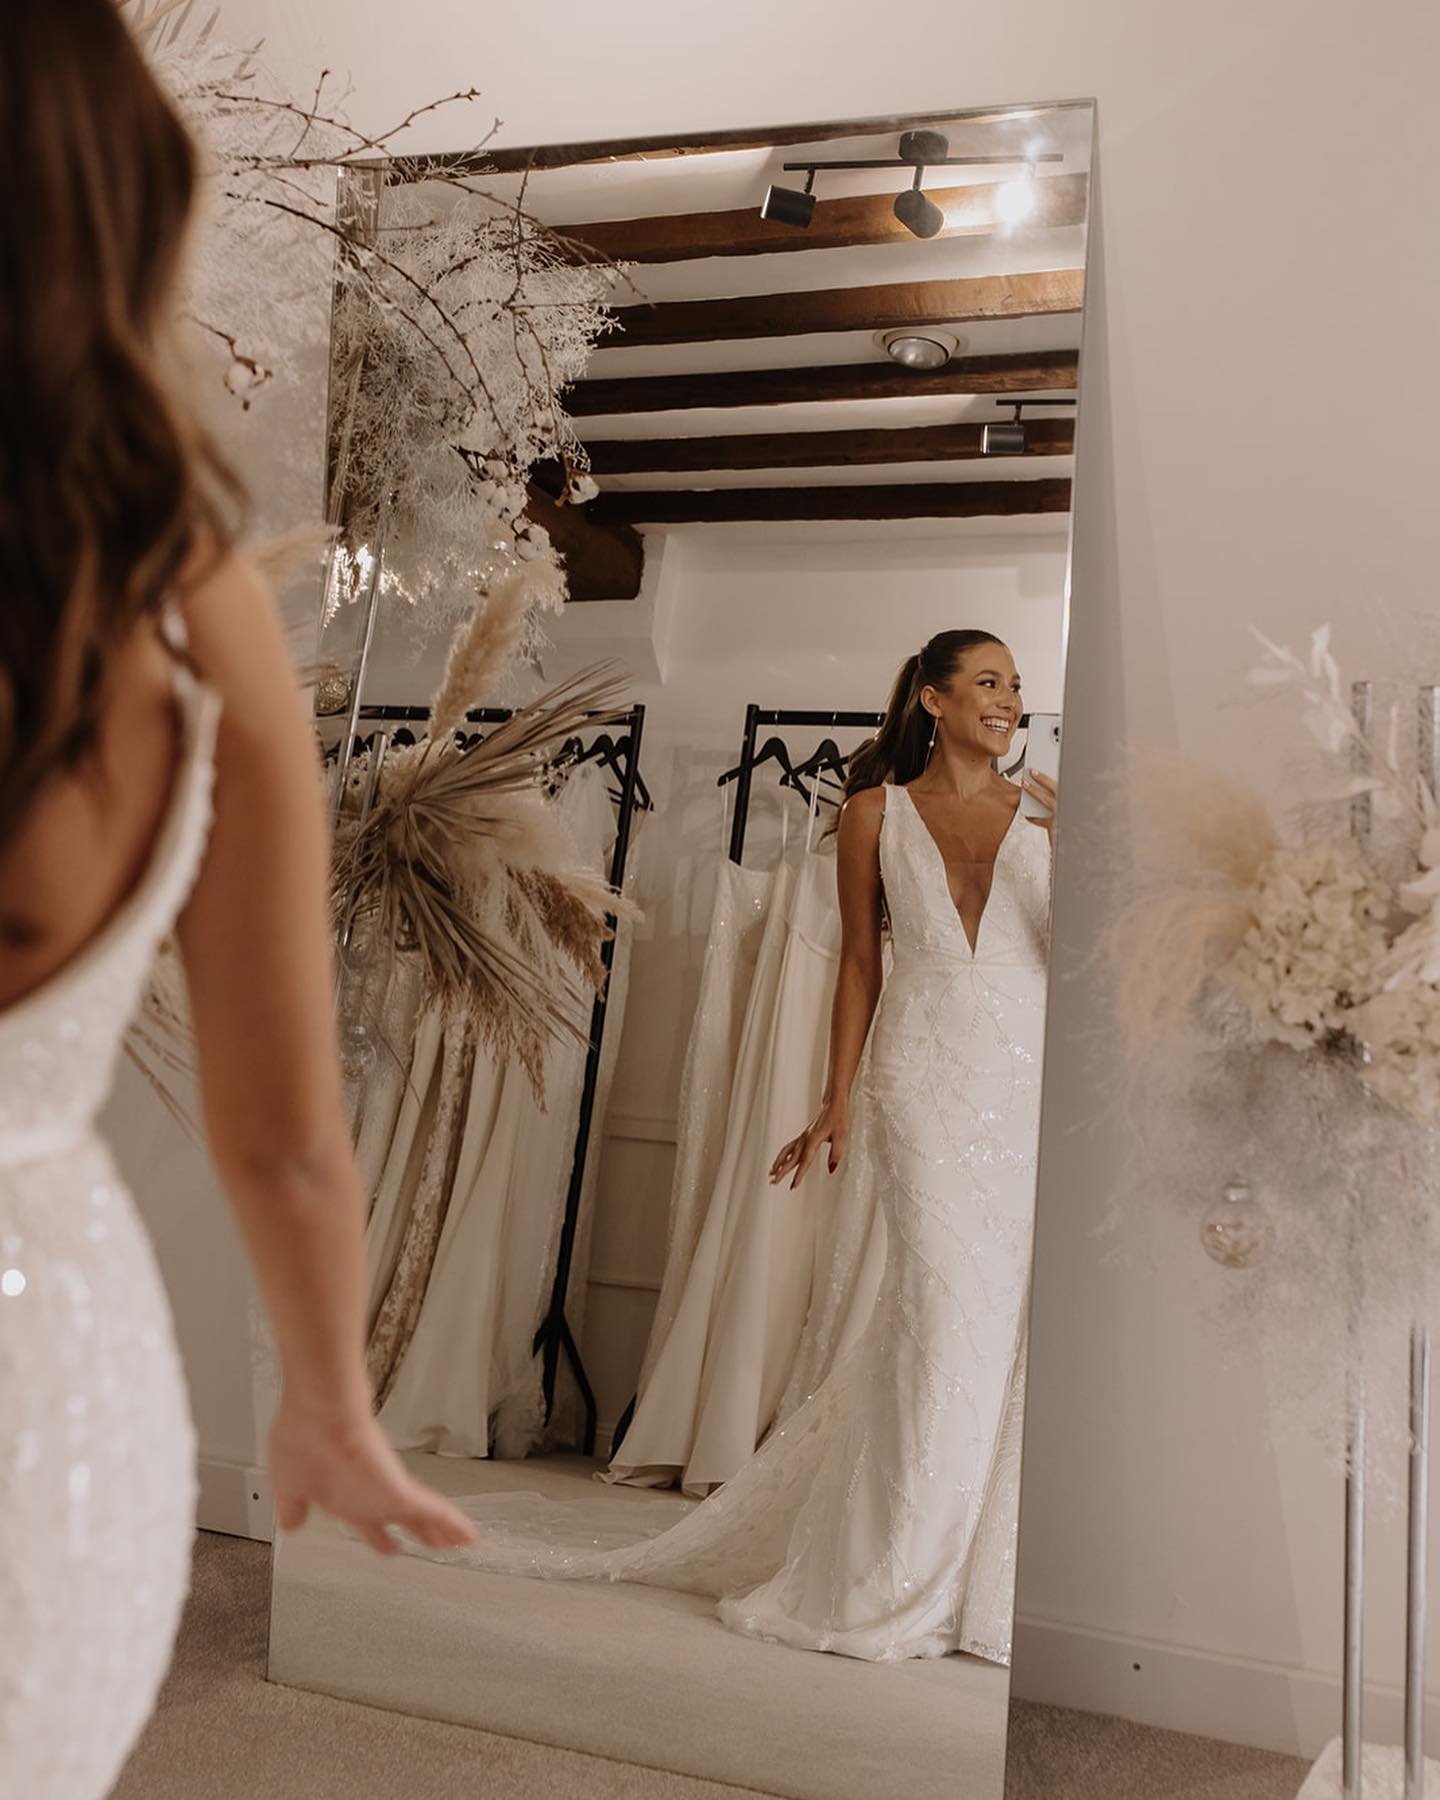 that moment when you find the one ✨

shopping at LFB isn&rsquo;t just about finding your dream wedding dress, we love to make every part of the experience special and memorable.

from the most tranquil environment, to the beautiful dresses and highly